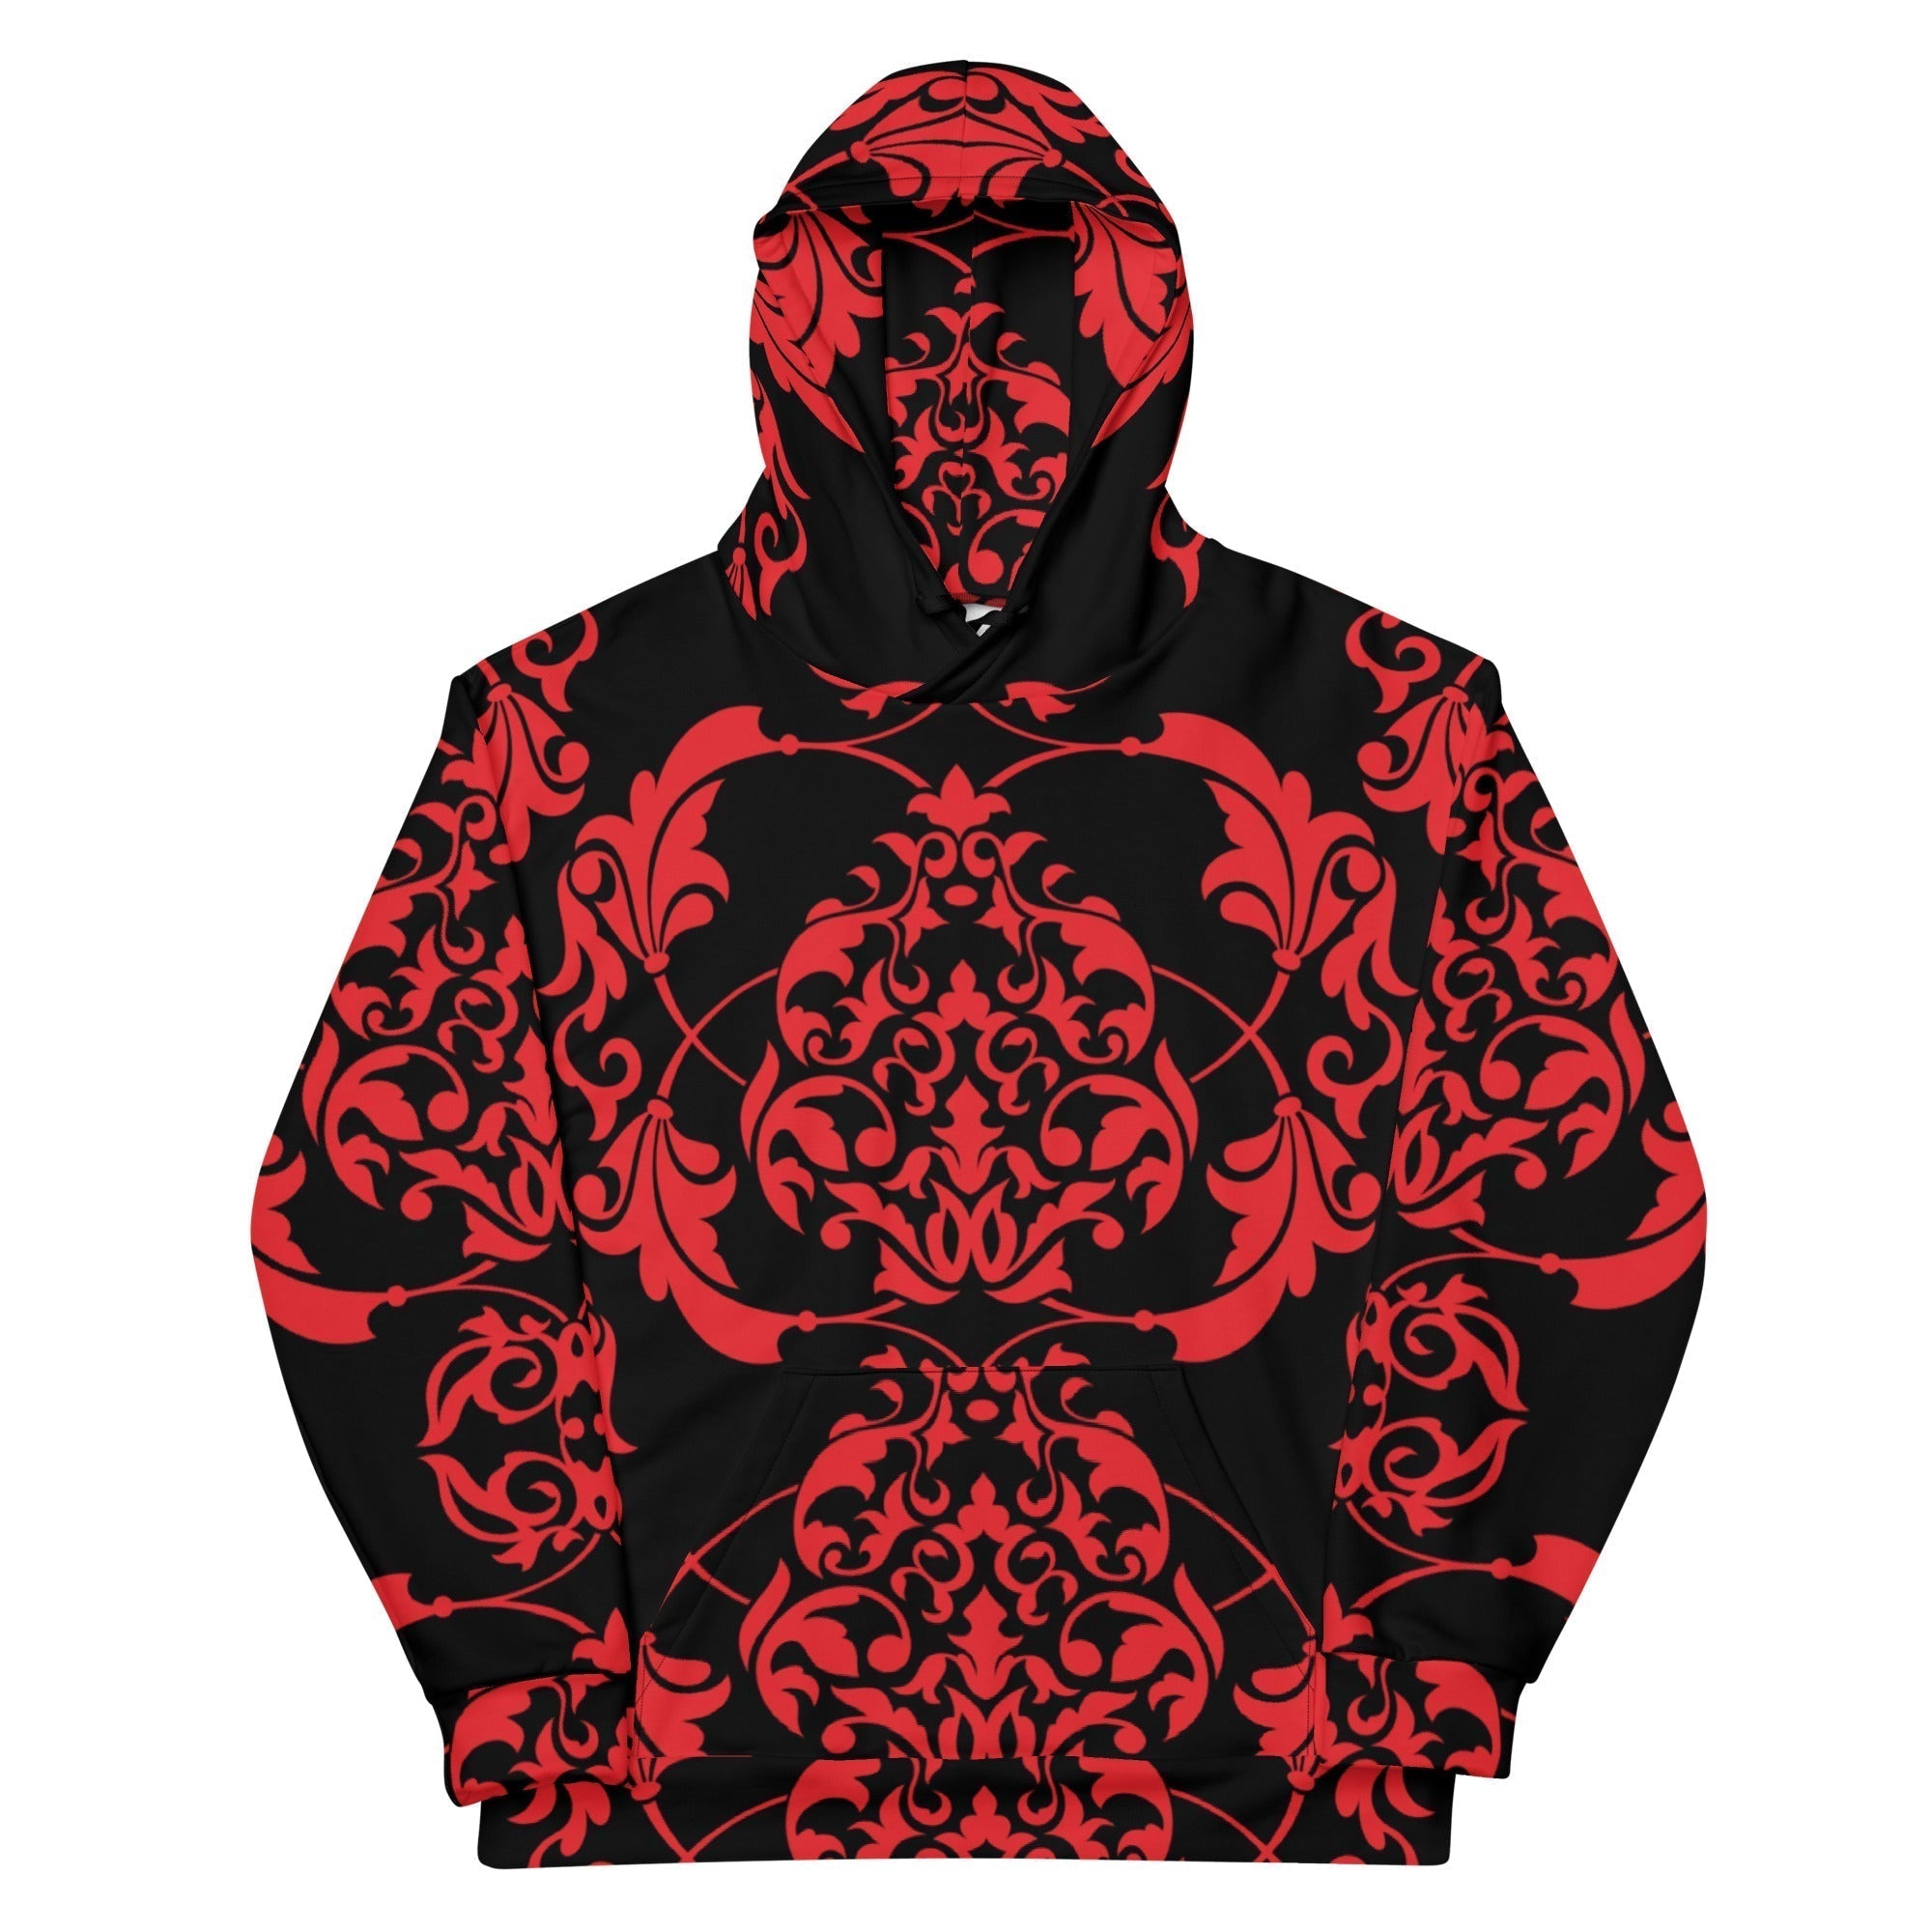 Unisex All-Over Print Hoodie - Red And Black Floral Euclidean European Pattern - GRAPHIC T-SHIRTS